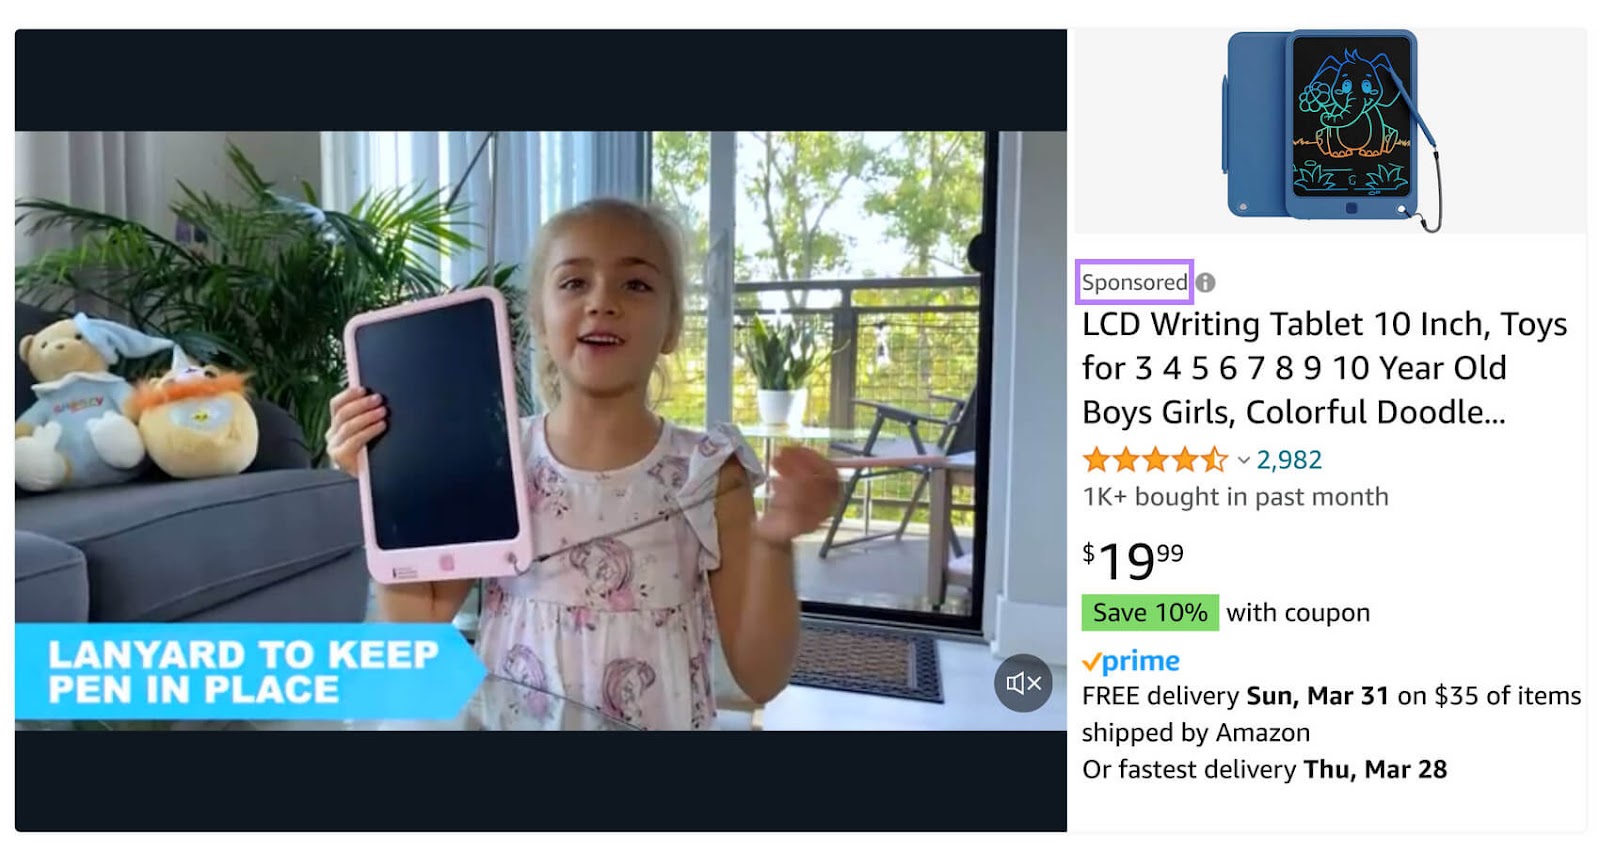 A sponsored merchandise  advertisement  for a penning  tablet connected  Amazon